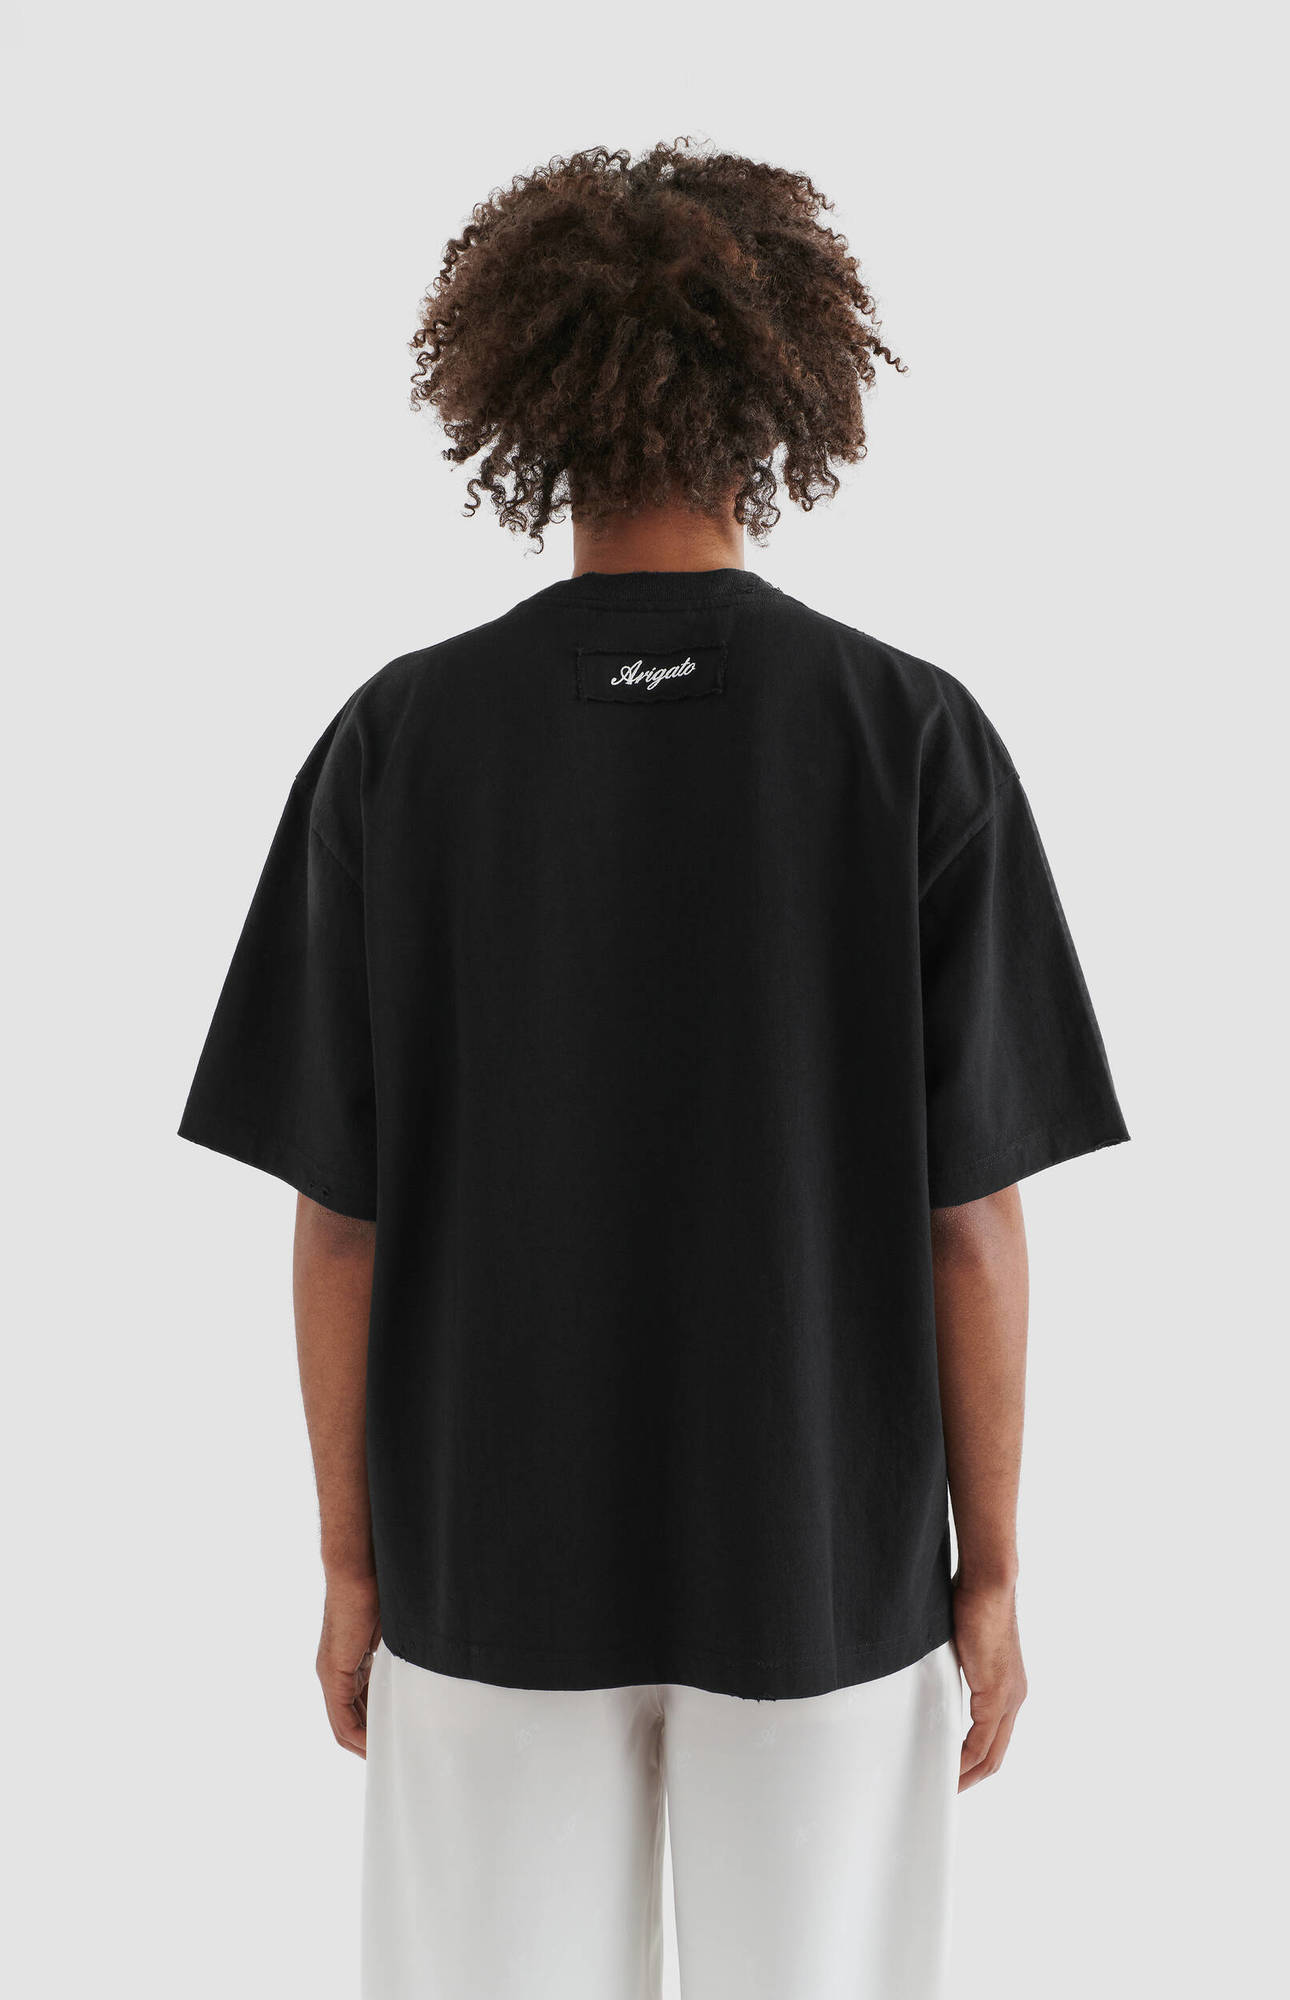 AXEL ARIGATO Series Distressed T-Shirt in Black